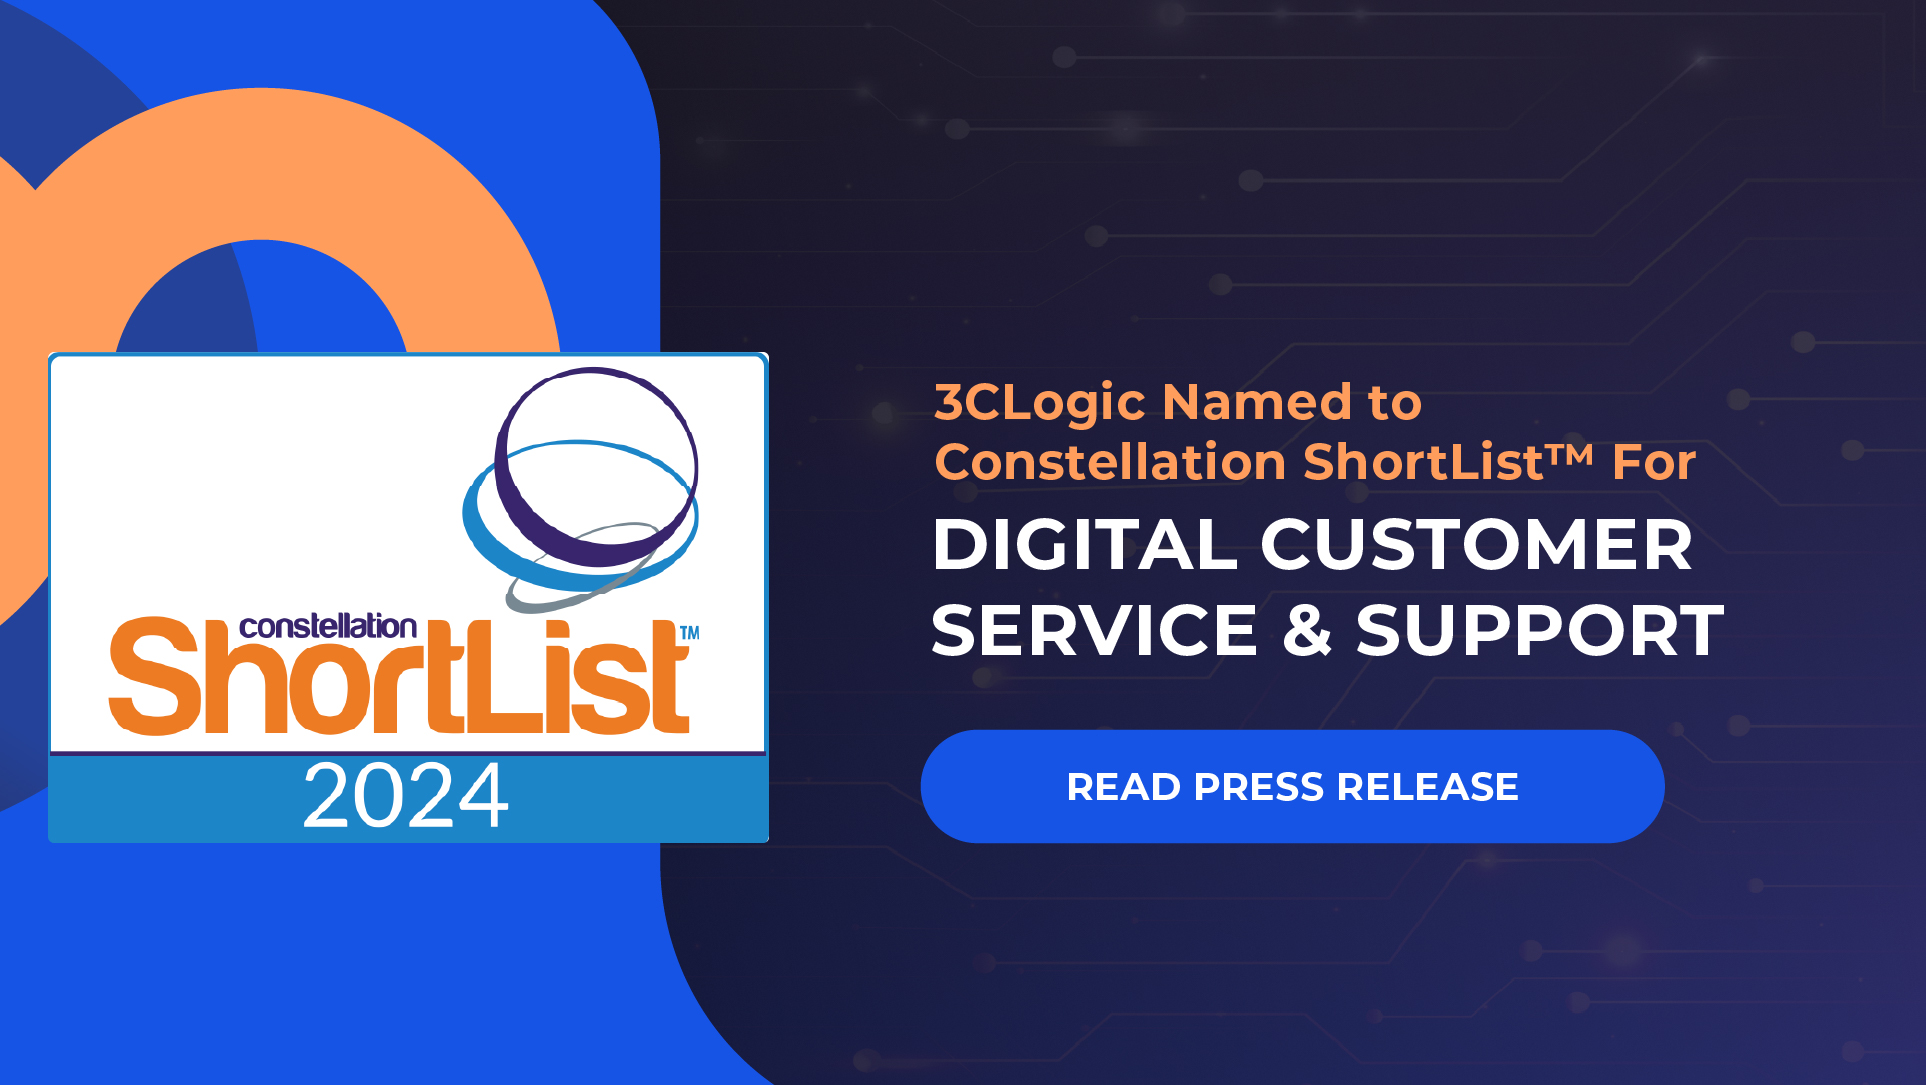 3CLogic Named to Constellation ShortList™ for Digital Customer Service and Support